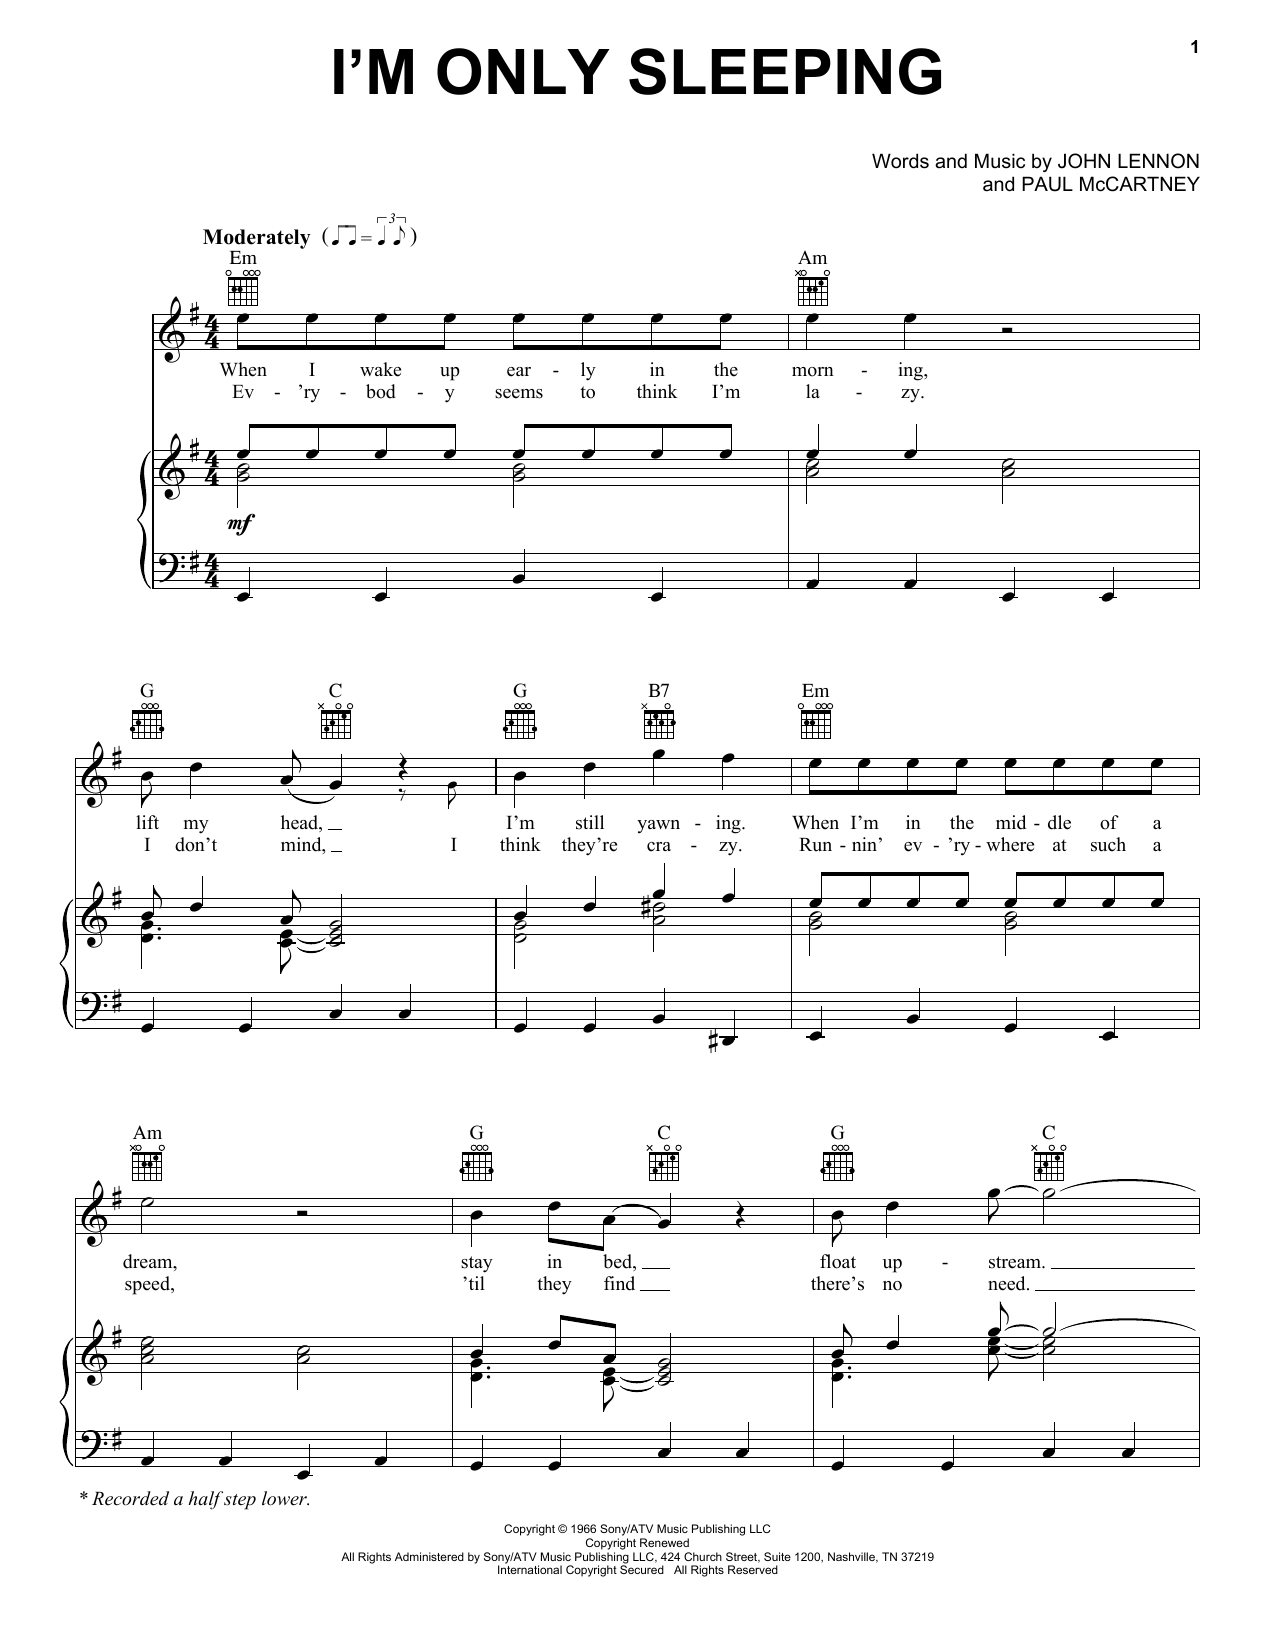 Download The Beatles I'm Only Sleeping Sheet Music